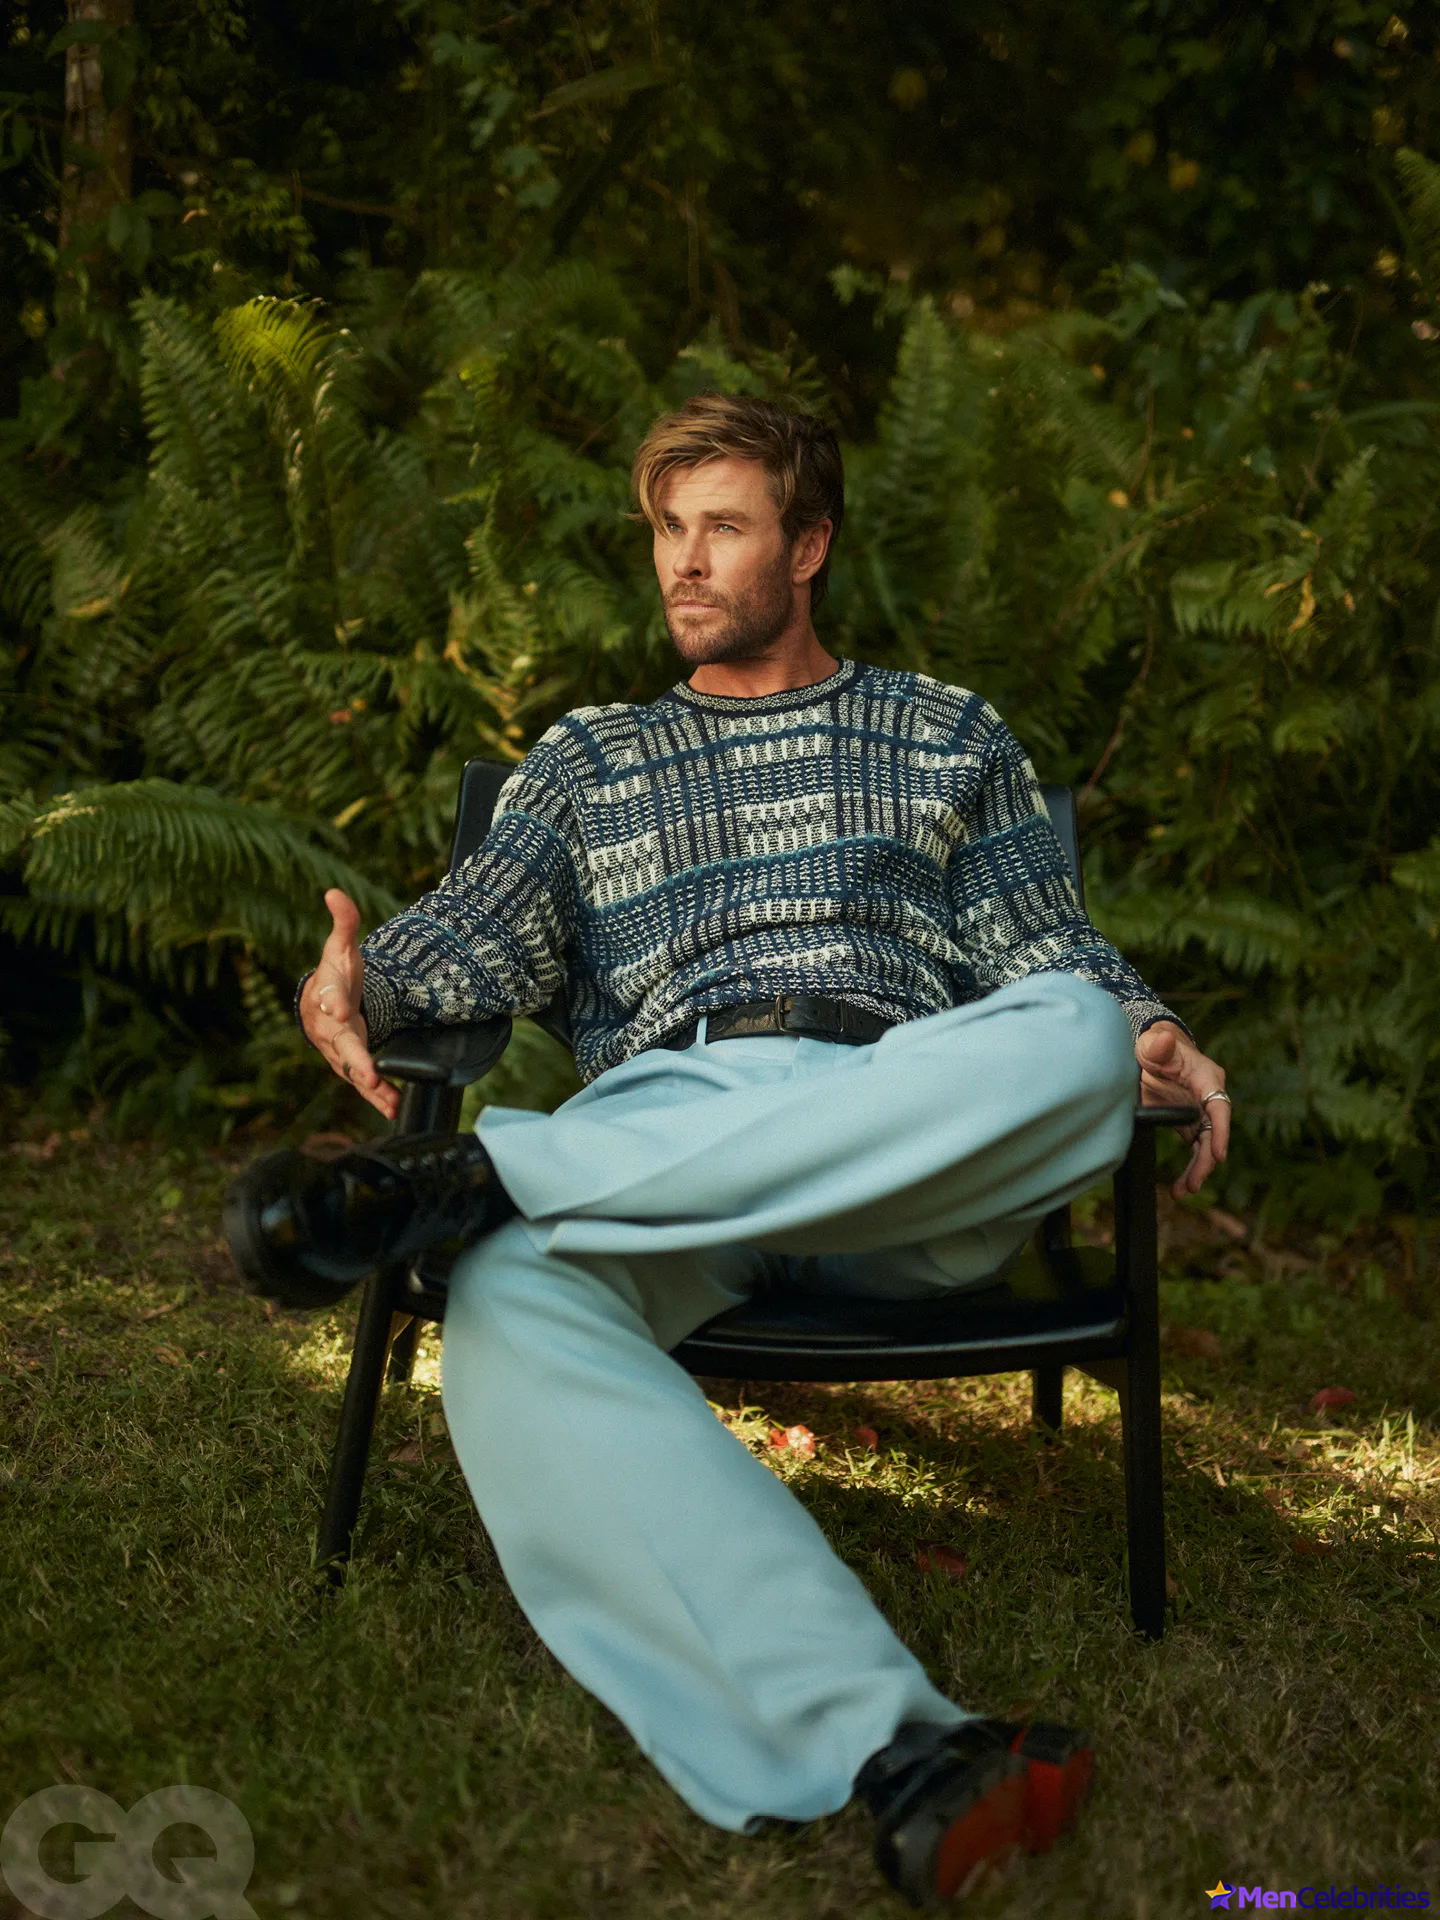 Chris Hemsworth talks about his love of surfing